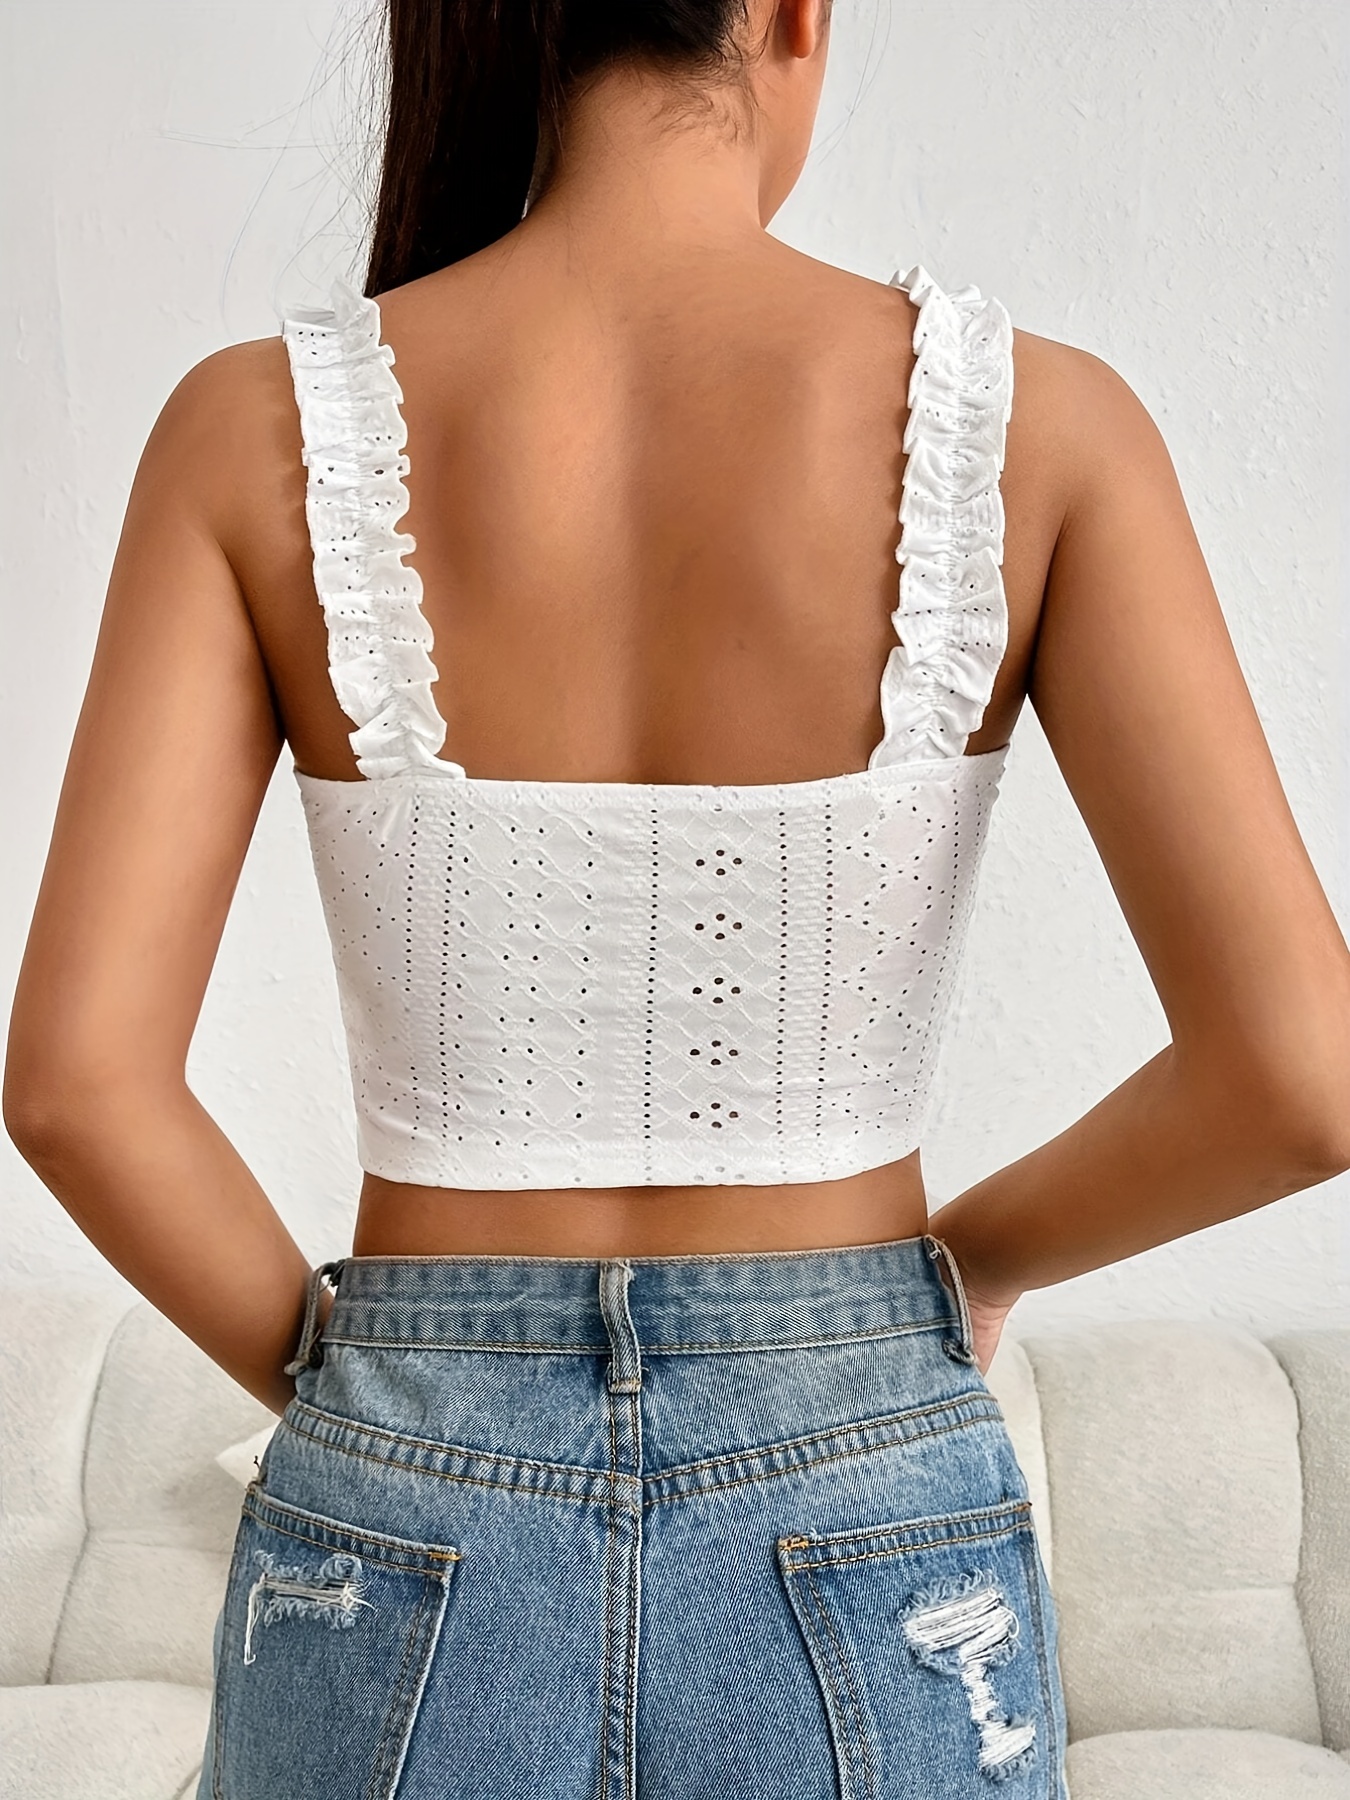 Eyelet Contrast Lace Cami Top, Casual V-neck Spaghetti Strap Top For  Summer, Women's Clothing For Coquette/Cute/Y2K Style